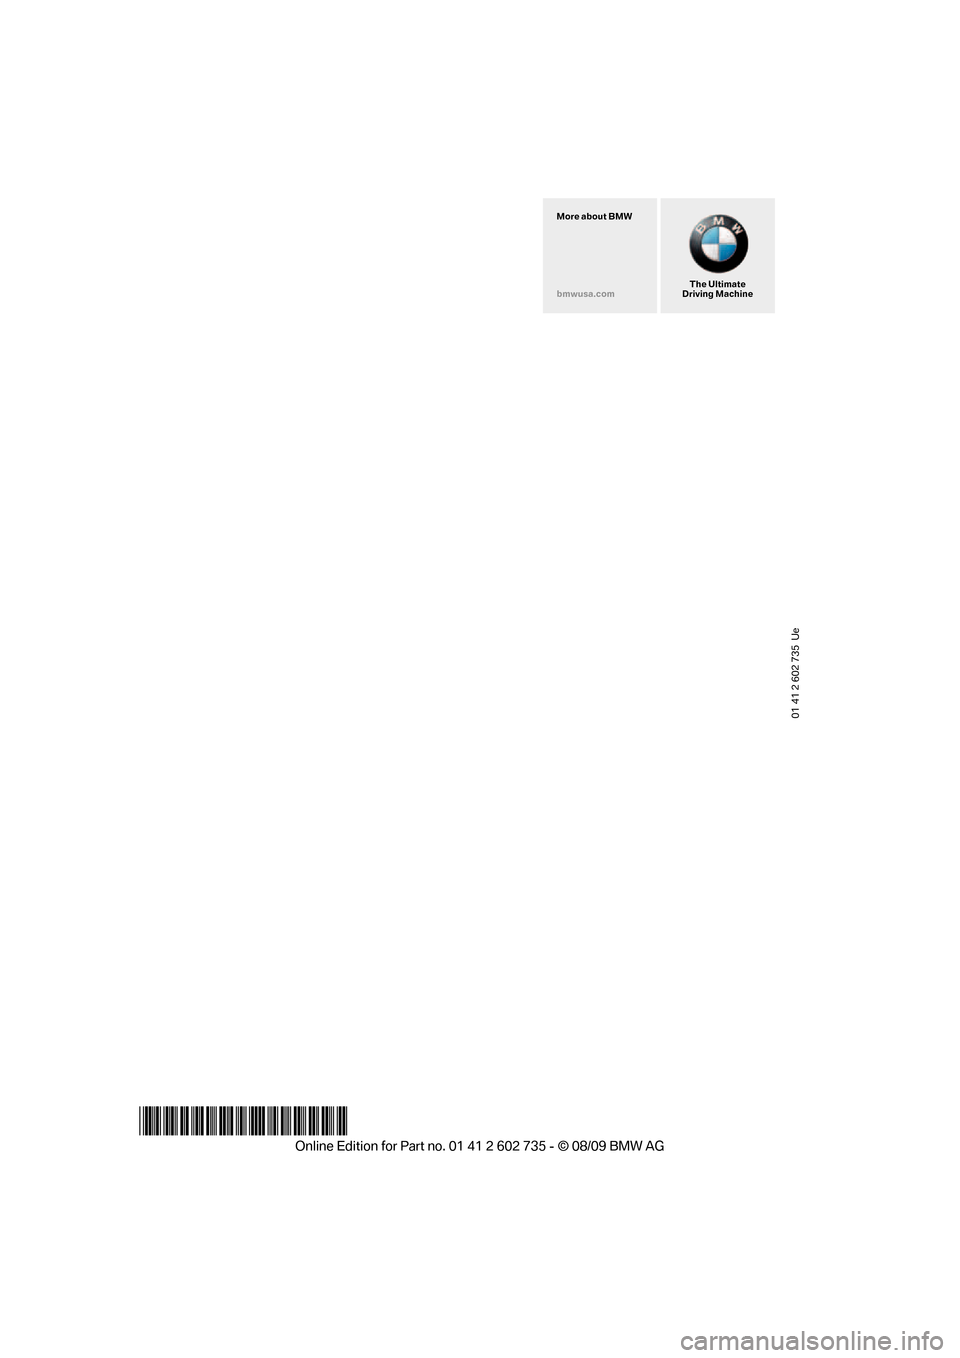 BMW M6 COUPE 2010 E63 Owners Manual 01 41 2 602 735  Ue
*BL260273500Z*
The Ultimate
Driving Machine More about BMW
bmwusa.com 